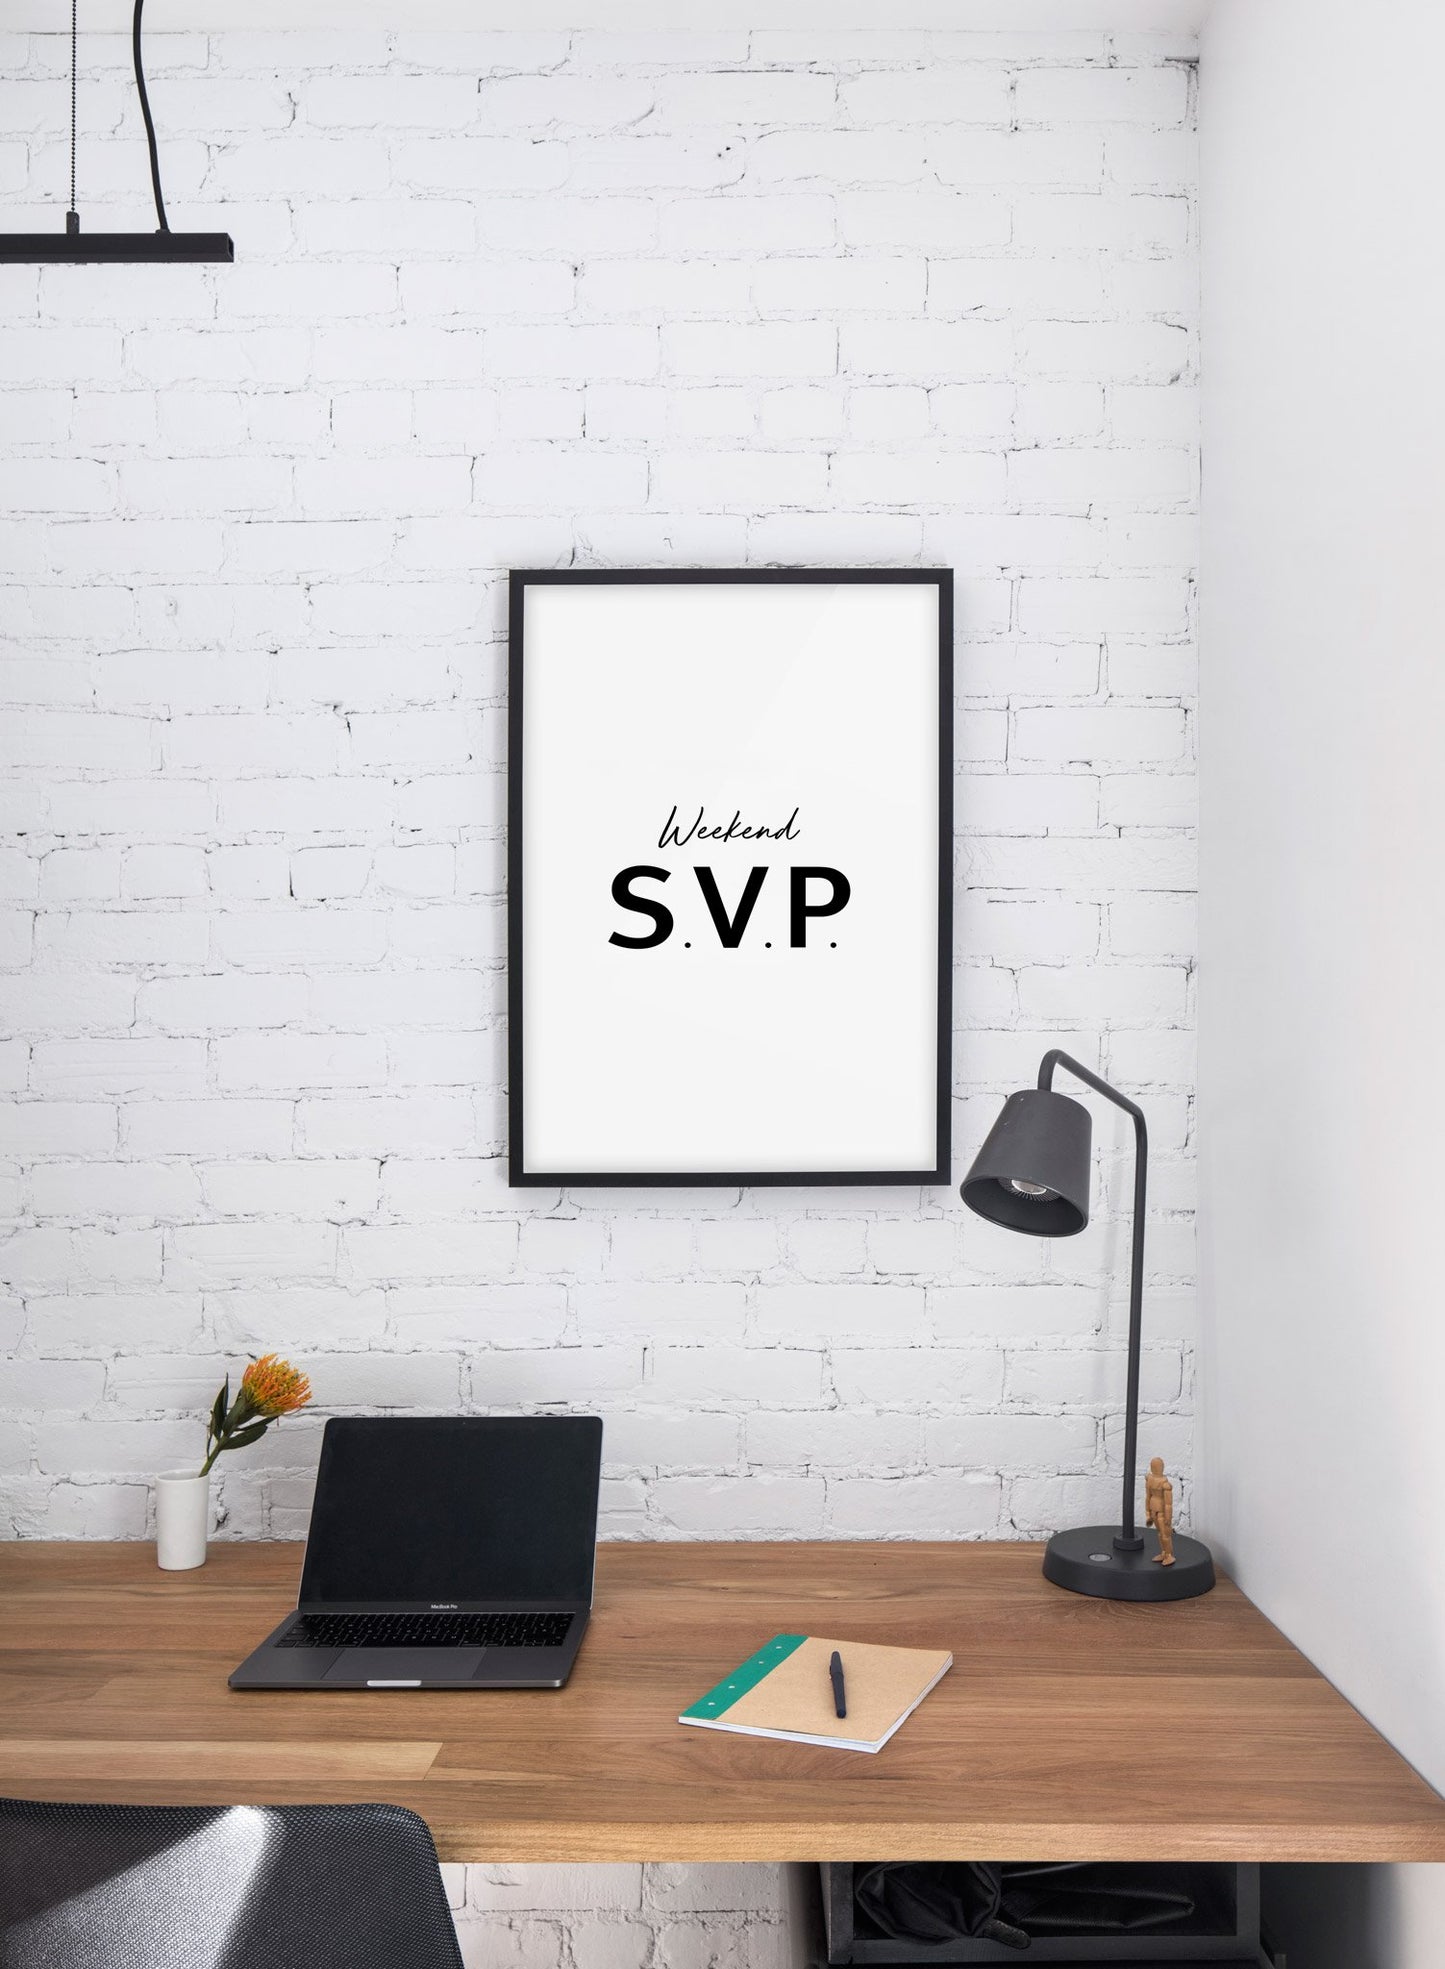 Scandinavian poster with black and white graphic typography design of Weekend s.v.p. -  Personal office